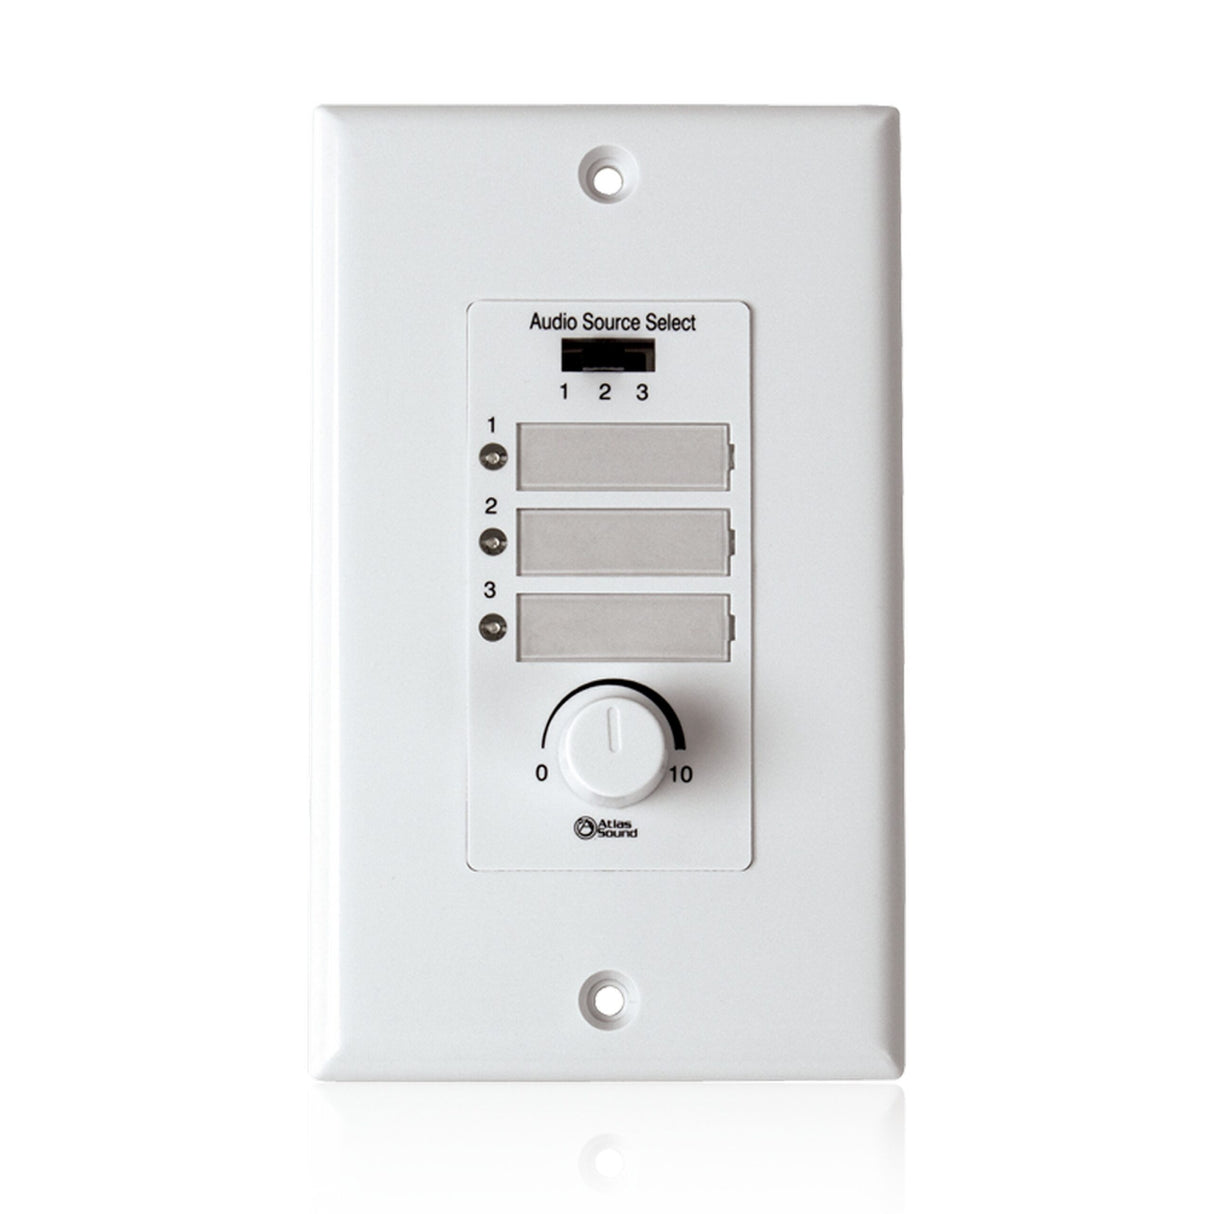 Atlas Sound WPD-RISRL Wall Plate Input Select Switch with Volume Control